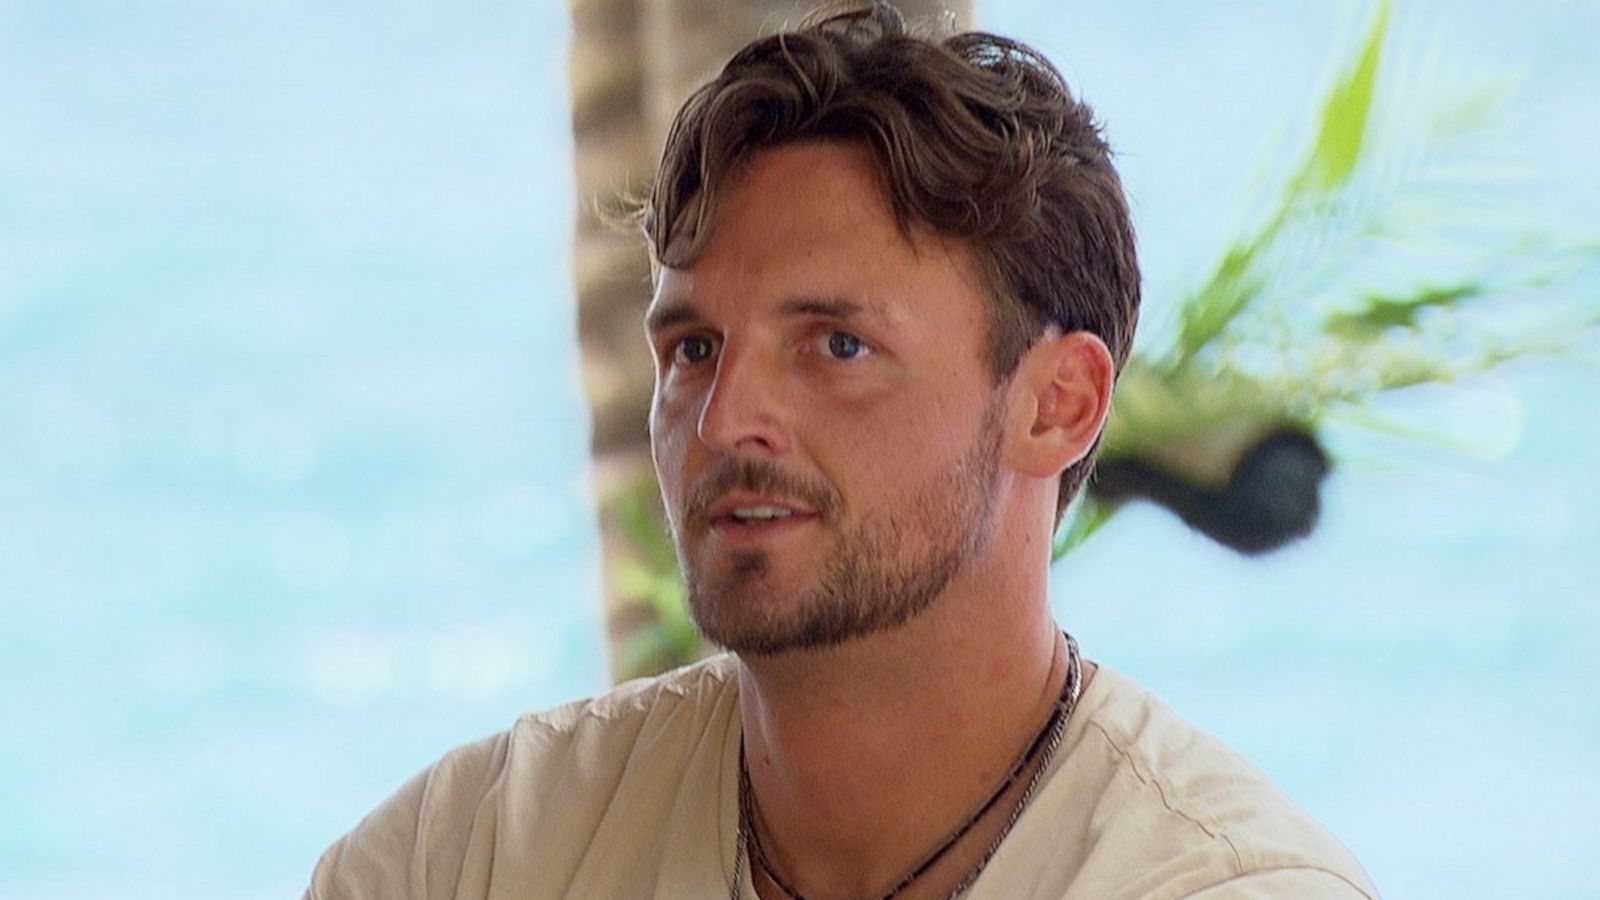 What will happen in this tangled romantic web on 'Bachelor in Paradise ...